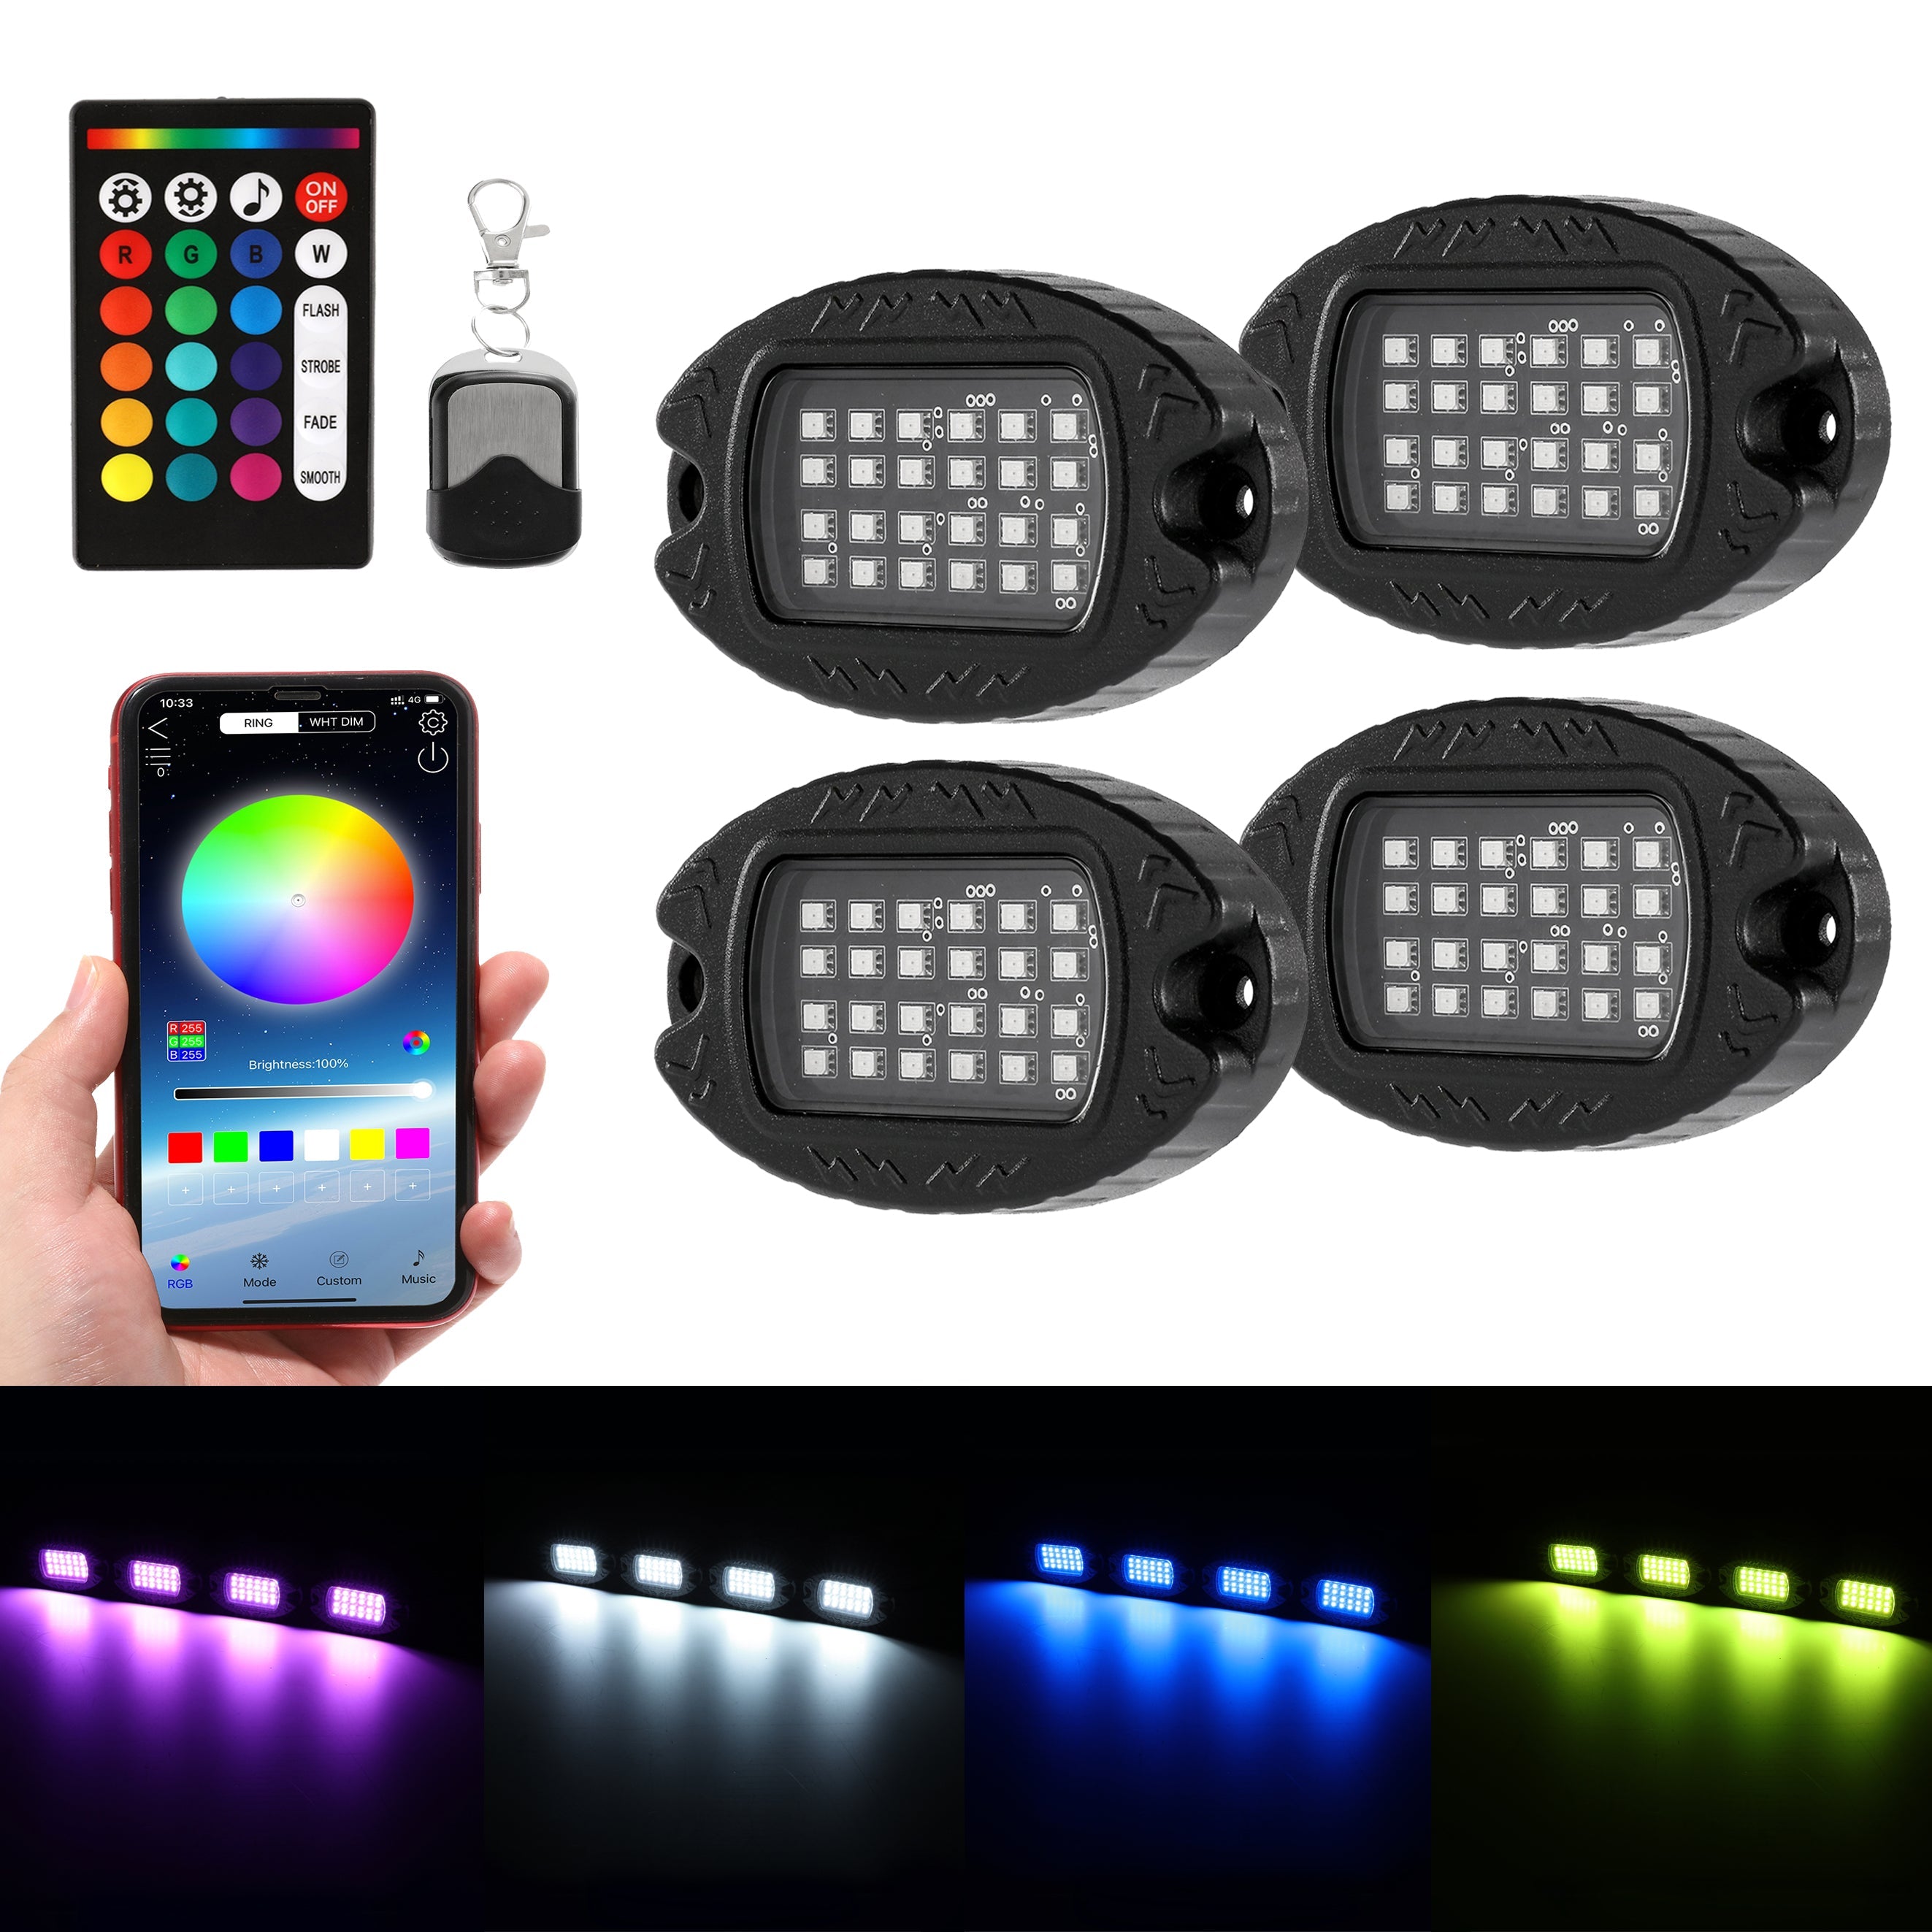 NEWEST! RGBW LED Rock Lights Kit with Bluetooth APP & Wireless Remote Control, Multicolor Neon Underglow Lights with Brake Light function